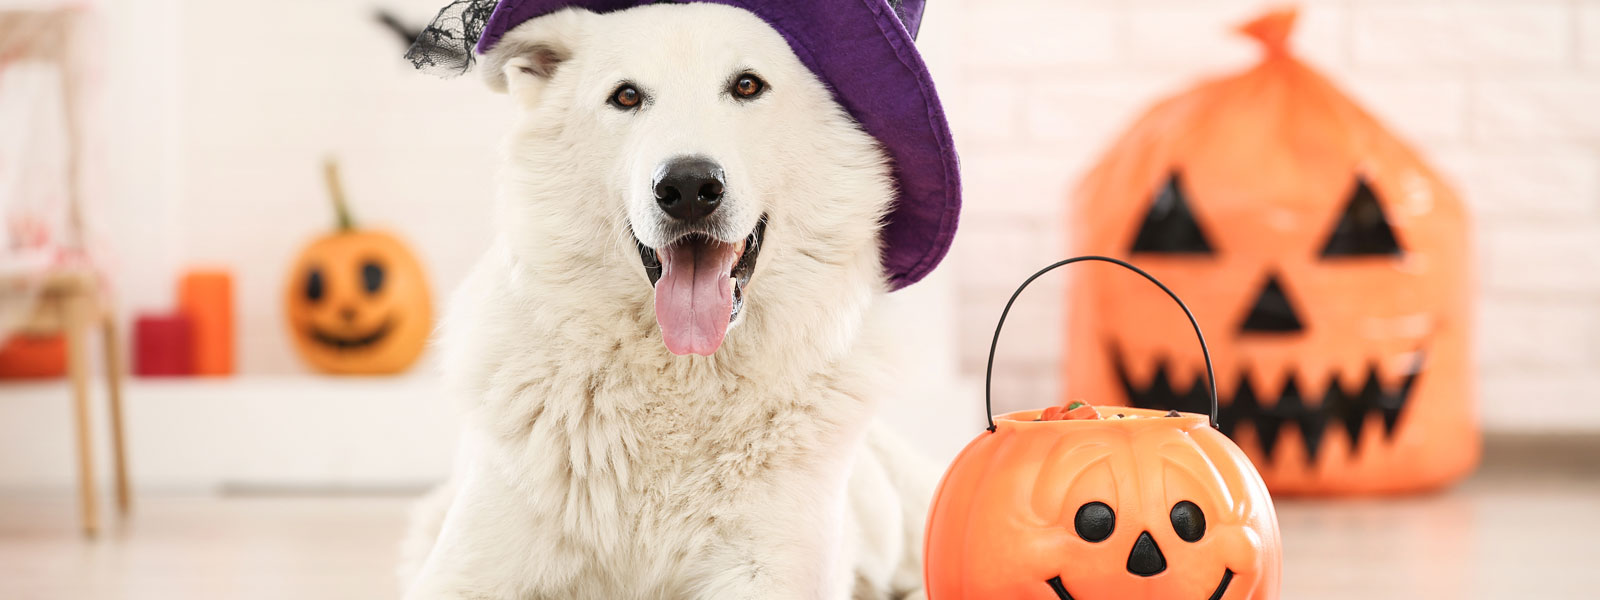 Stay Safe This Fright Month! 5 Halloween Safety Tips for Pets